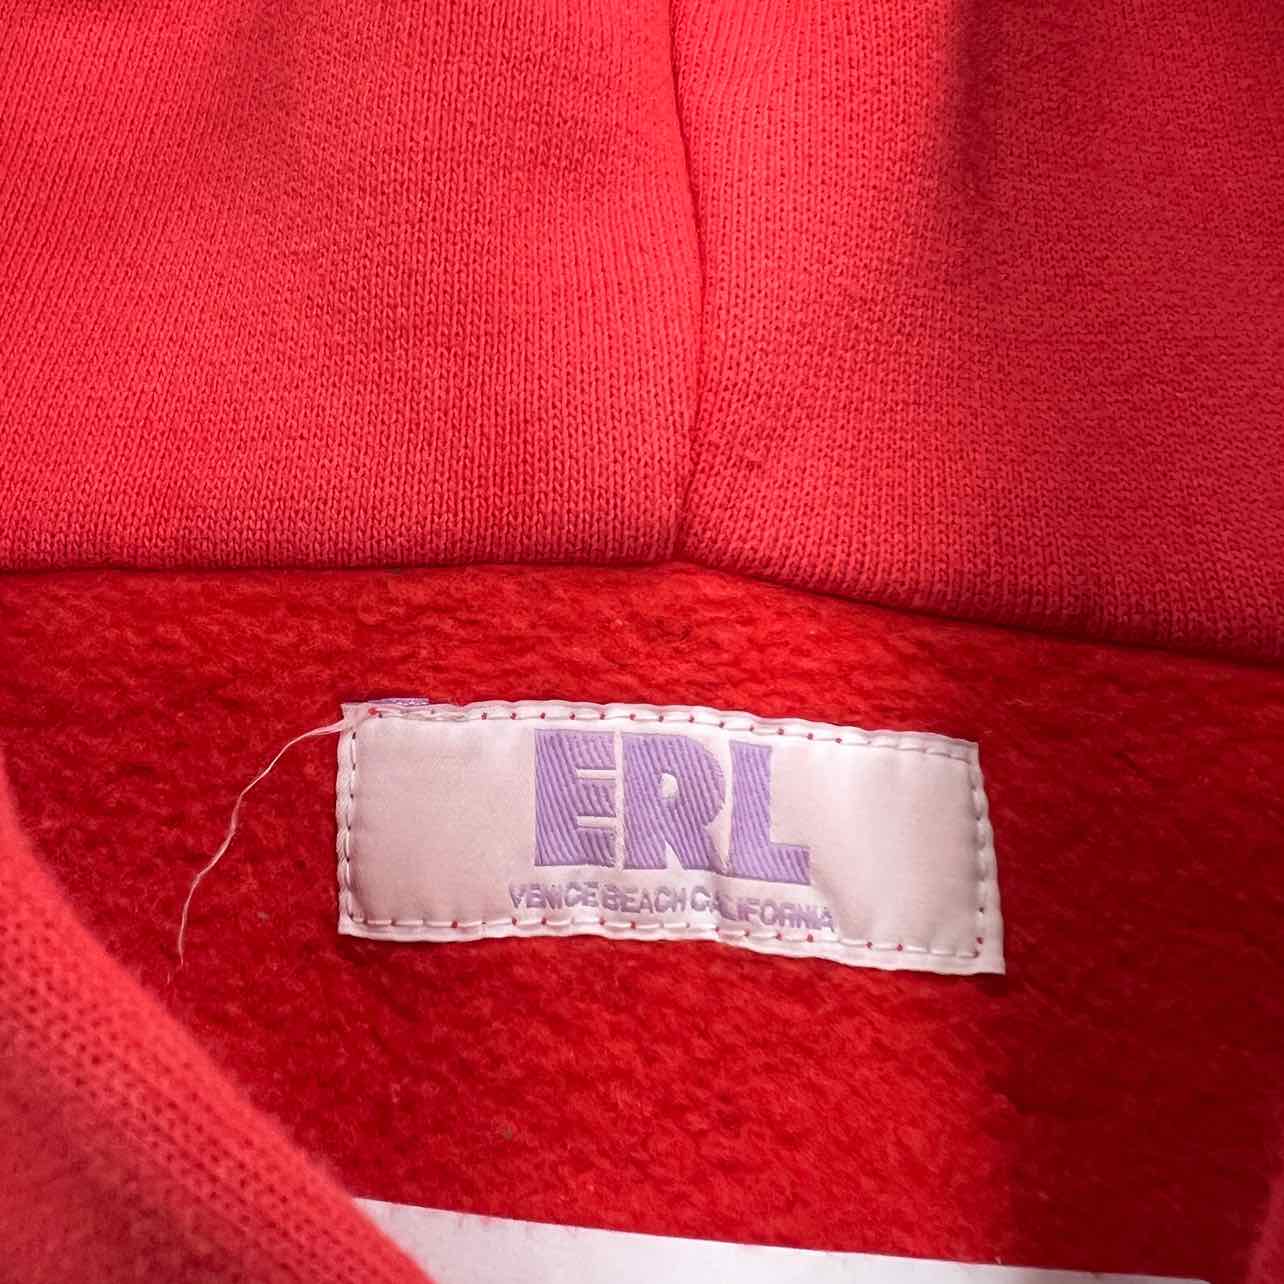 ERL Hoodie "SWIRL" Multi-Color Used Size M